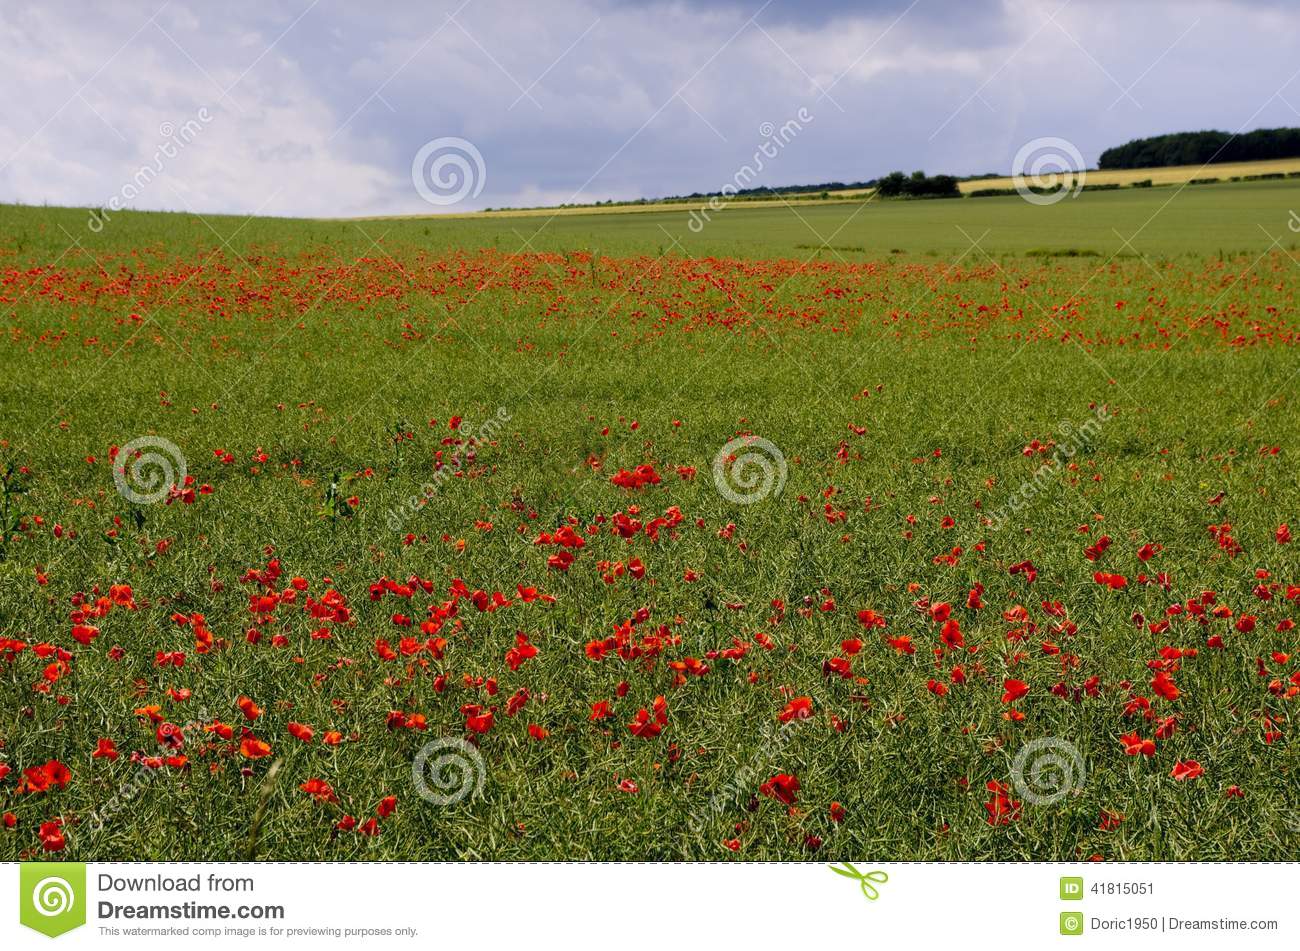 Image Of Red Poppies In An Oil Seed Rape Field The Rape Has Lost Its